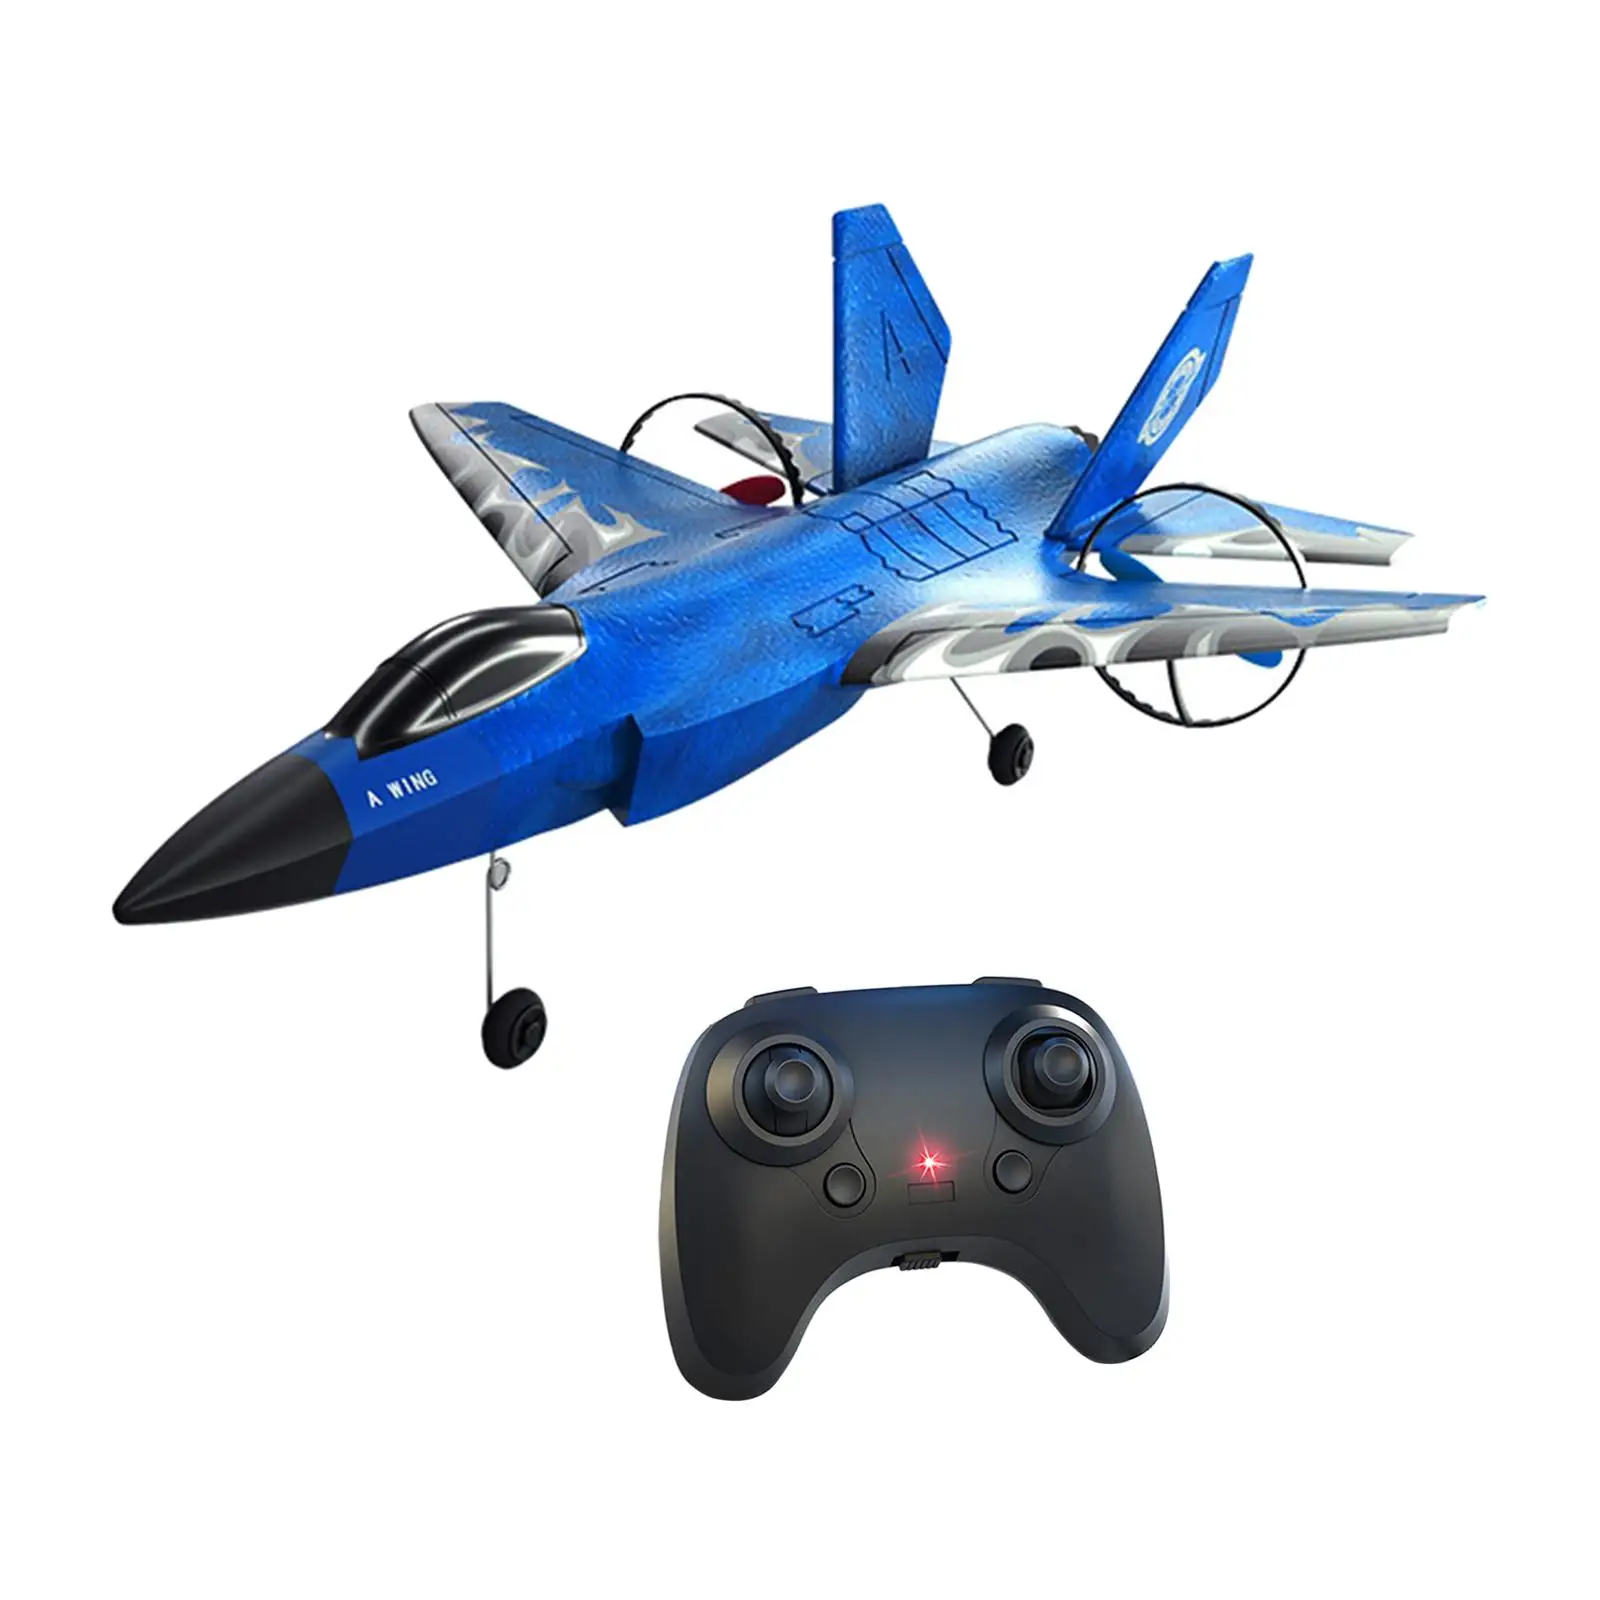 RC Glider Aircraft Easy to Fly Lightweight Ready to Fly Aircraft Remote Control Airplane Boys Girls Adults Kids Beginner